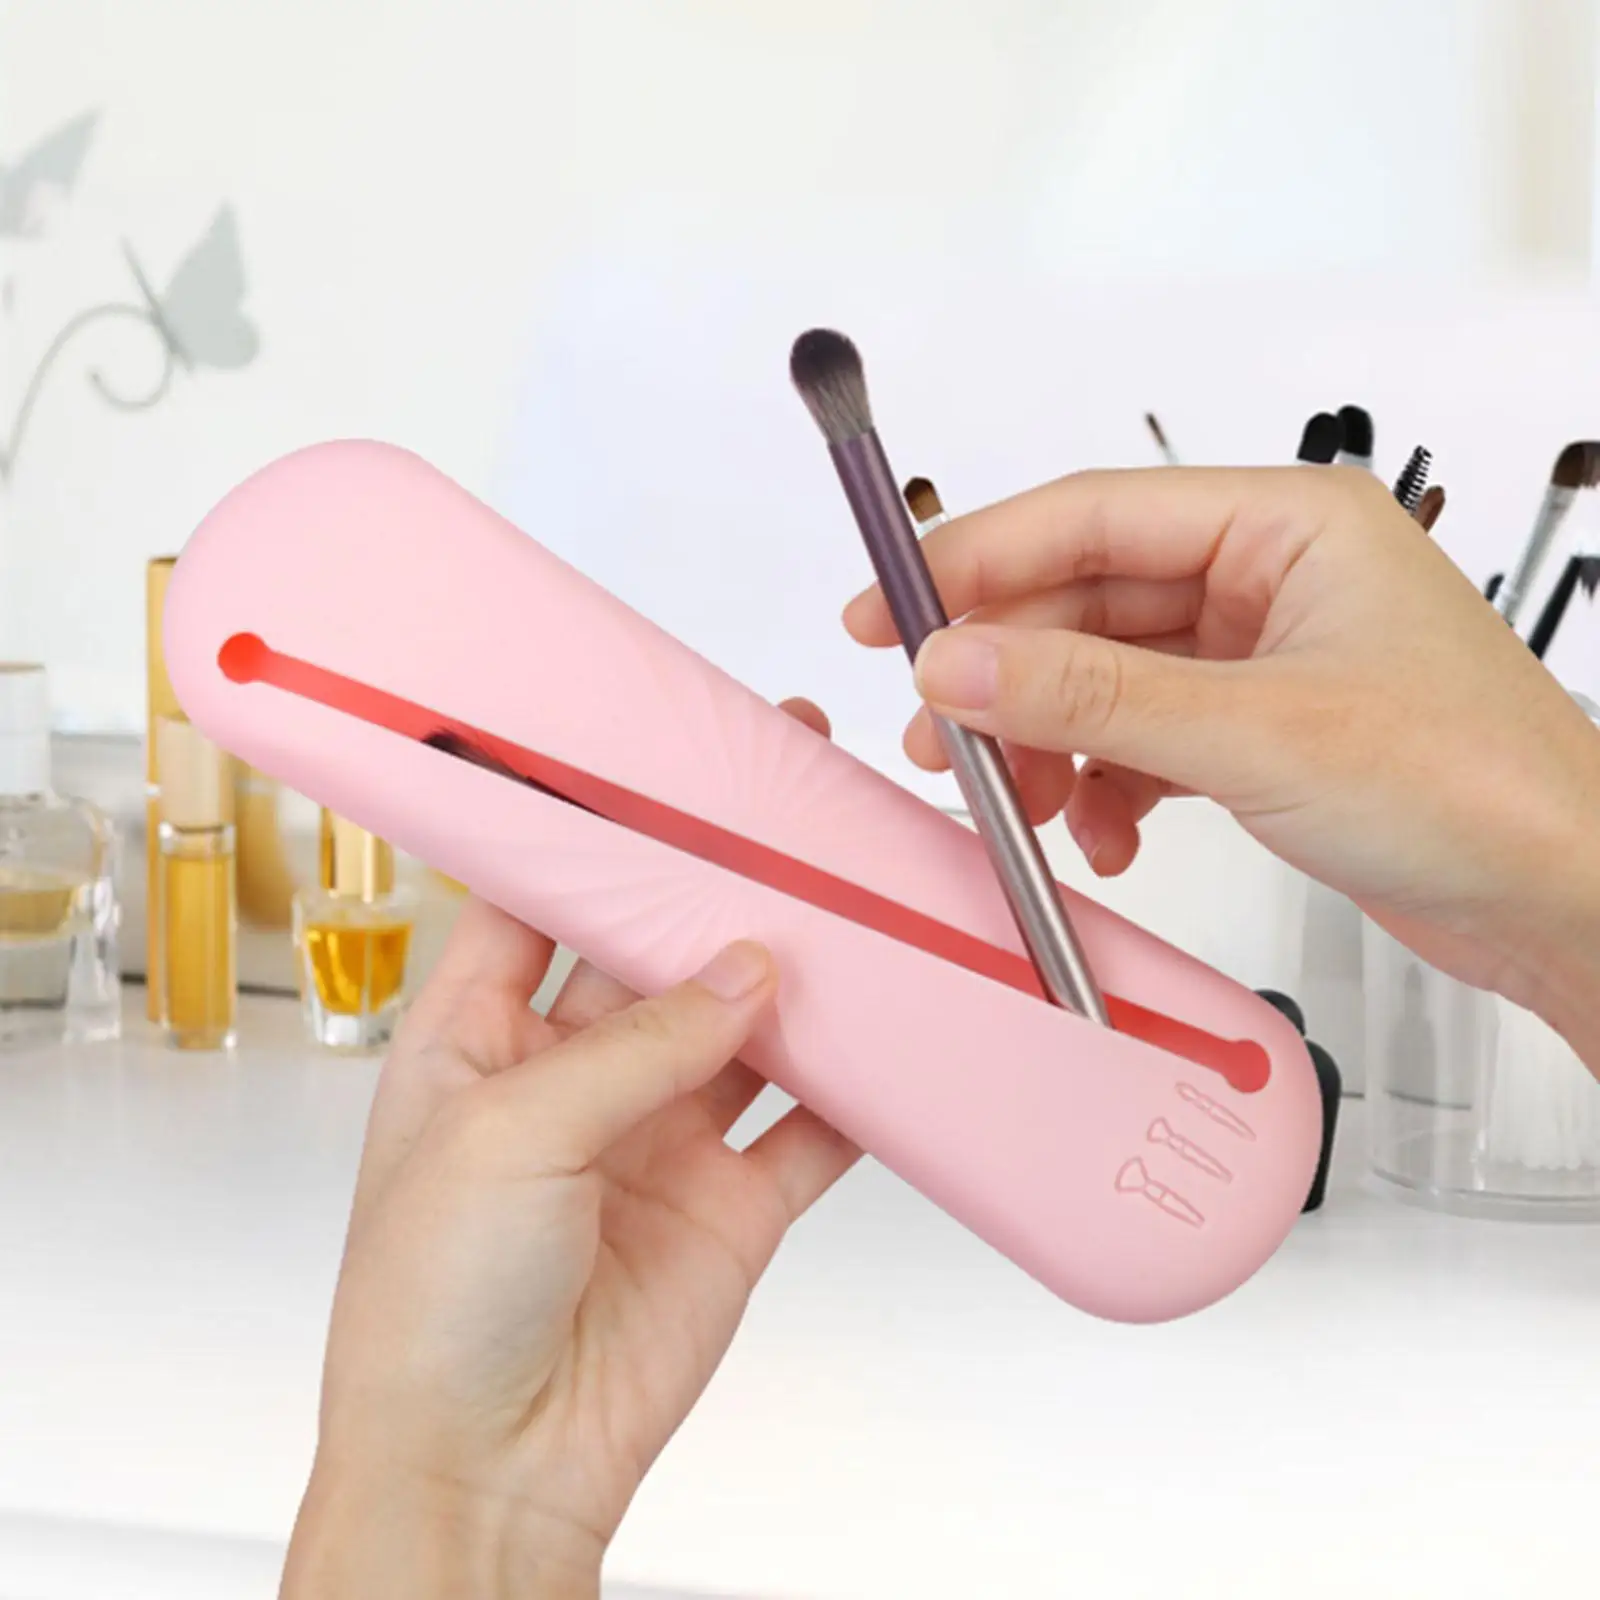 Makeup Brush Holder Portable Travel Brushes Case Bag Cup Storage for Travel Woman Girl